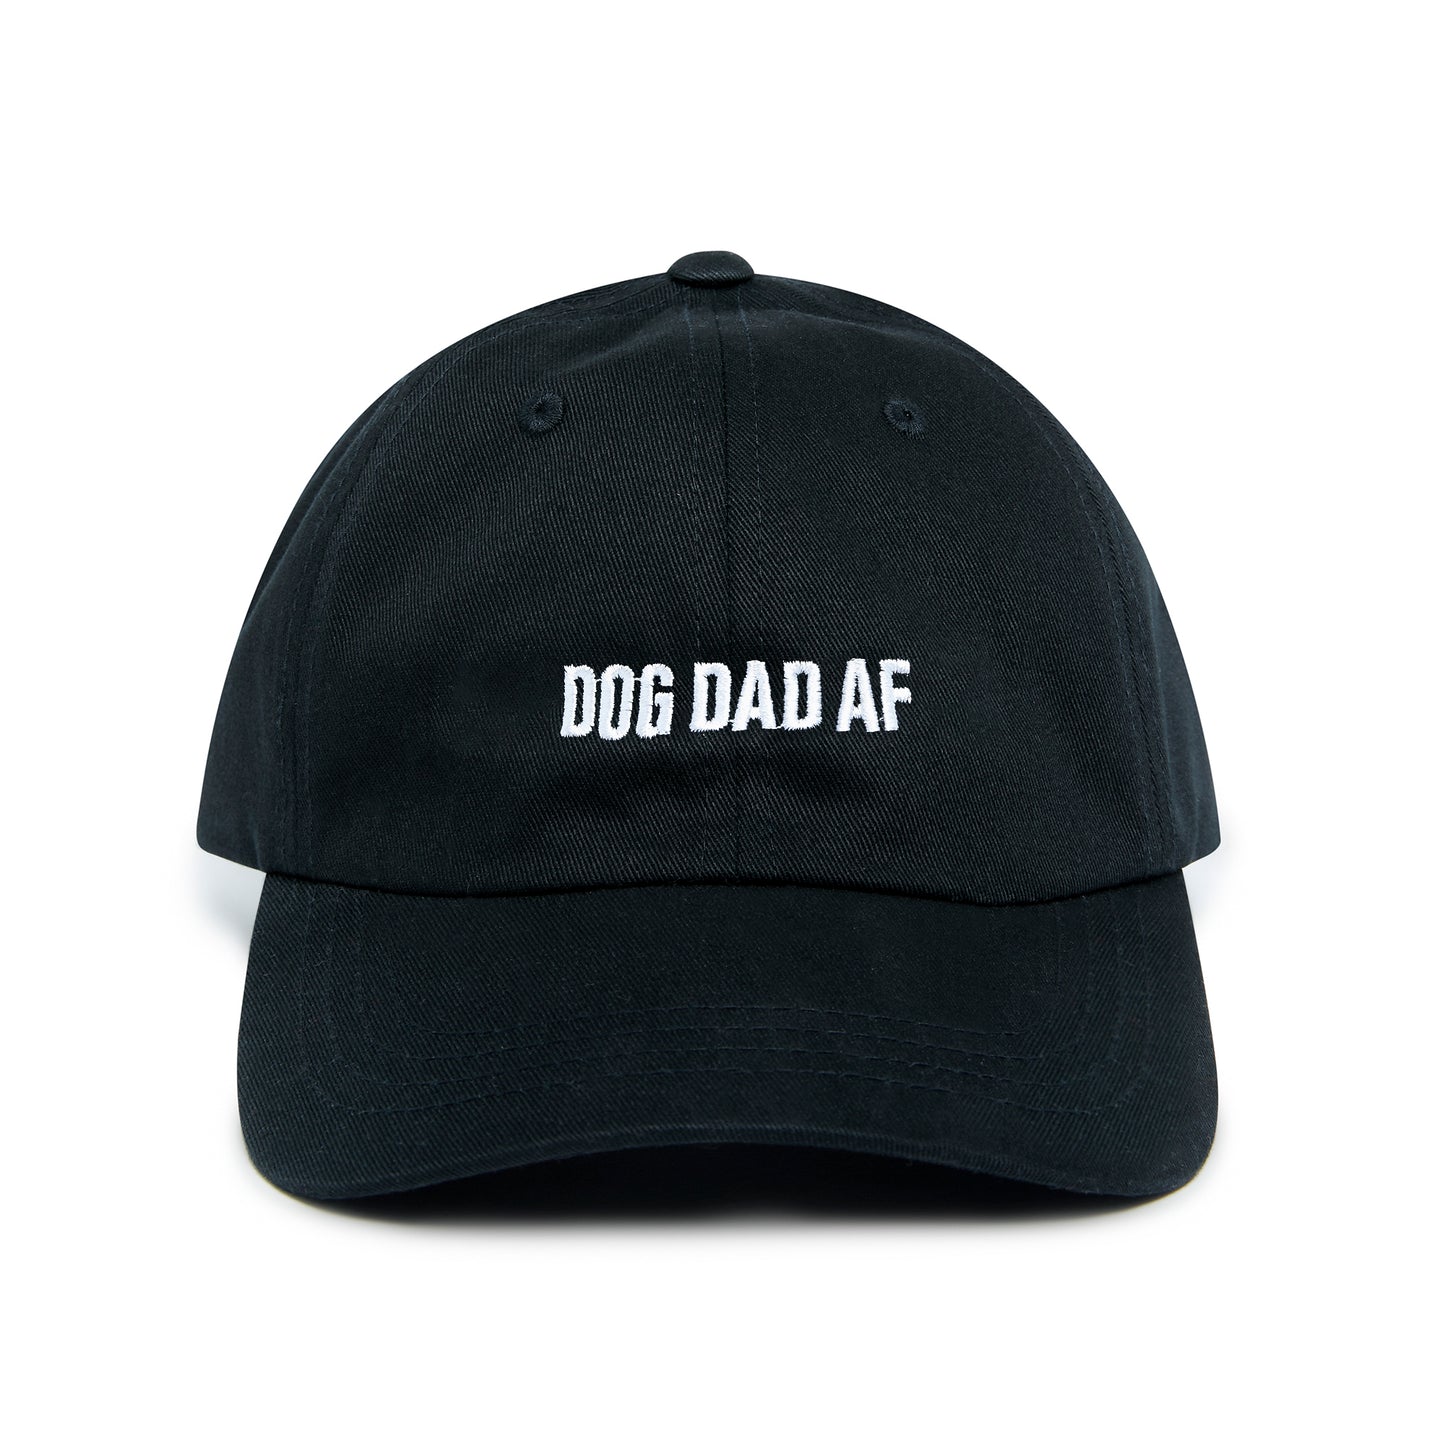 Load image into Gallery viewer, Dog Dad Hat
